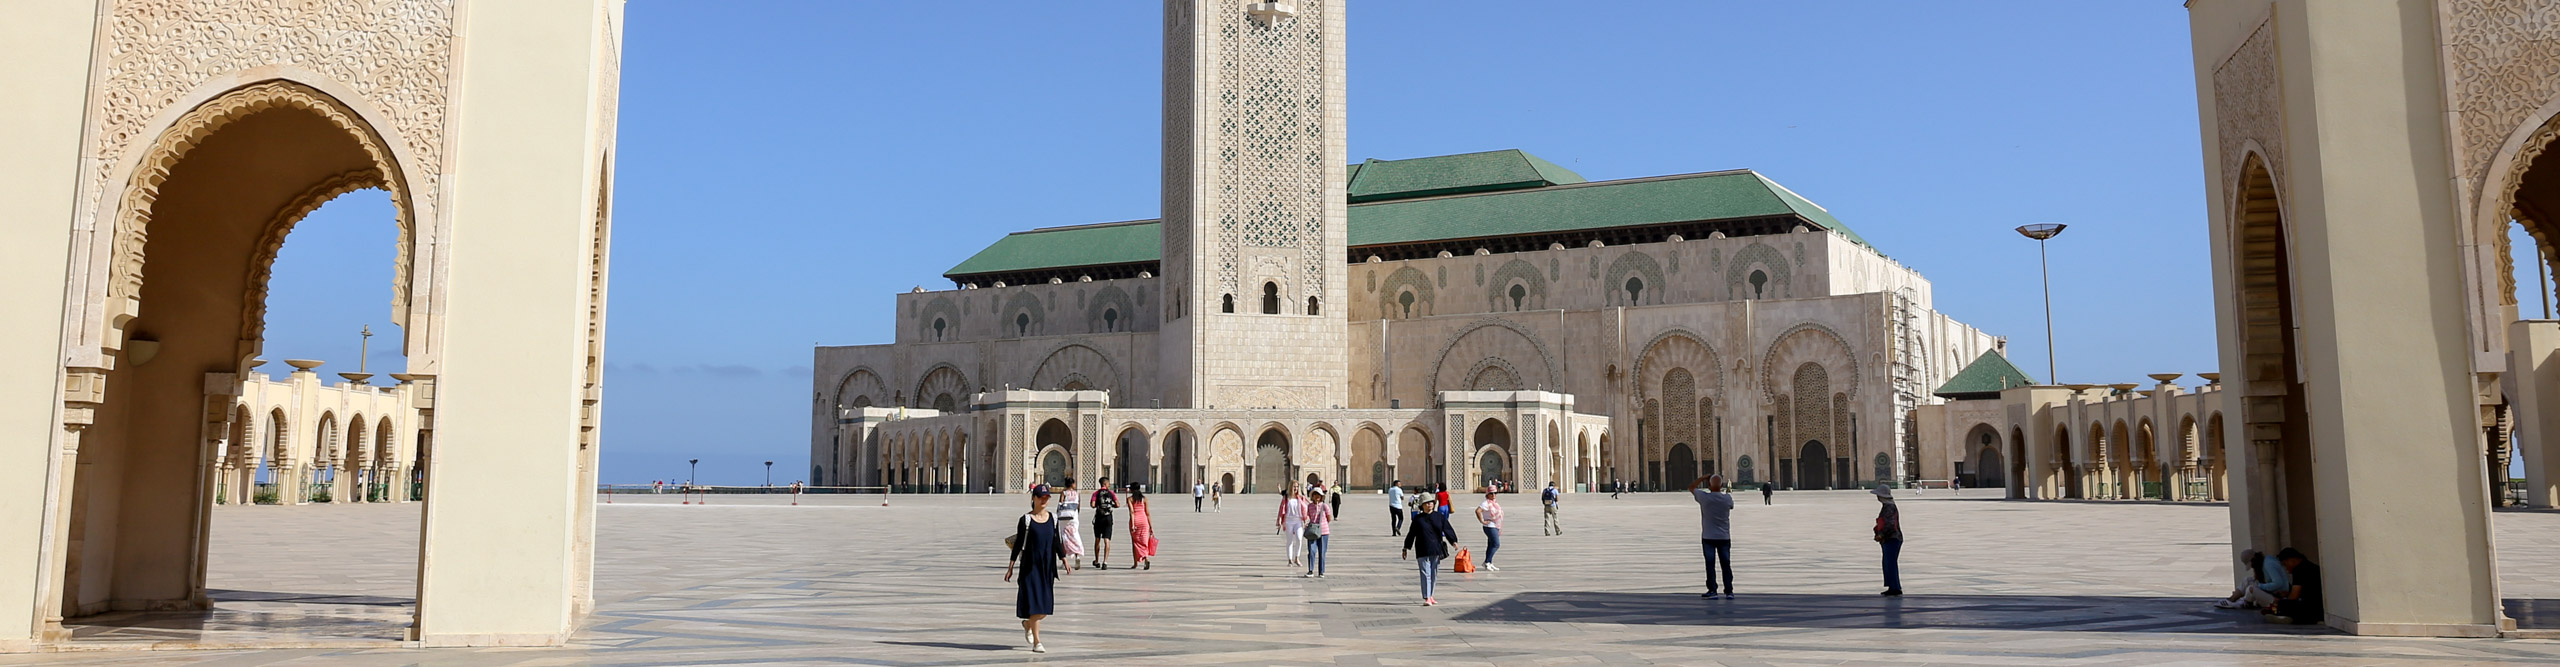 People walking outside the Hassan Mosque, with a clear blue sky, in Casablanca, Morocco 